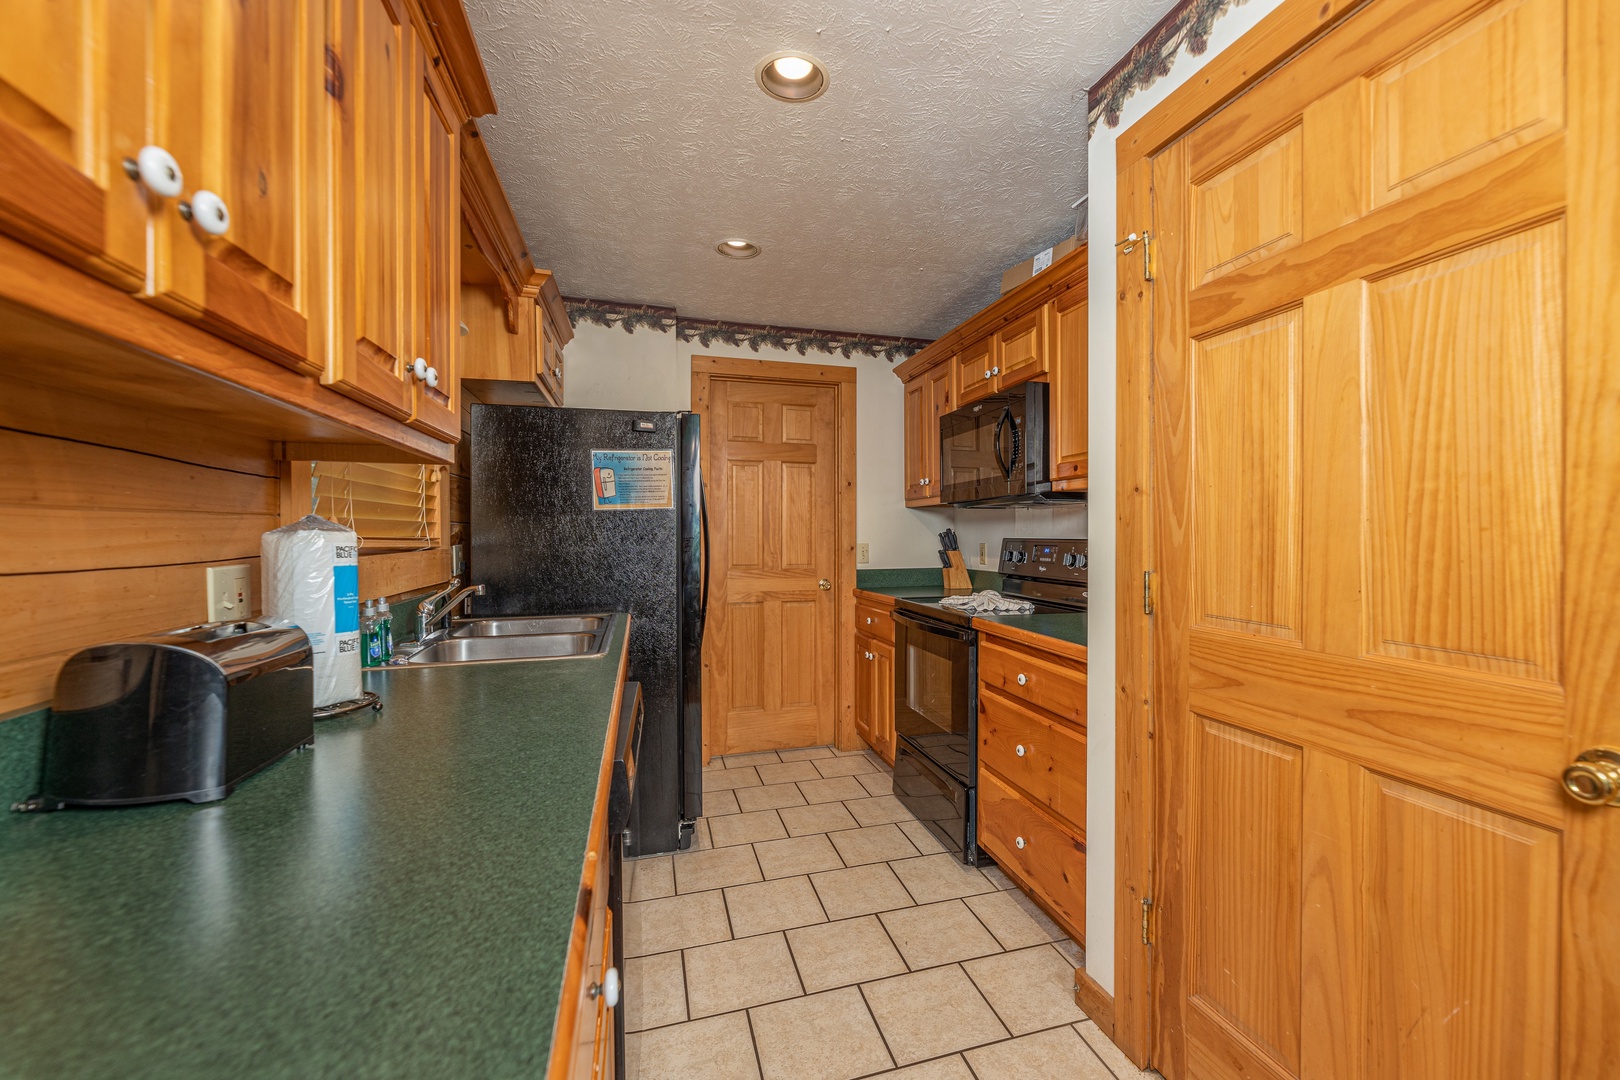 Galley kitchen with black appliances at Cub's Crossing, a 3 bedroom cabin rental located in Gatlinburg